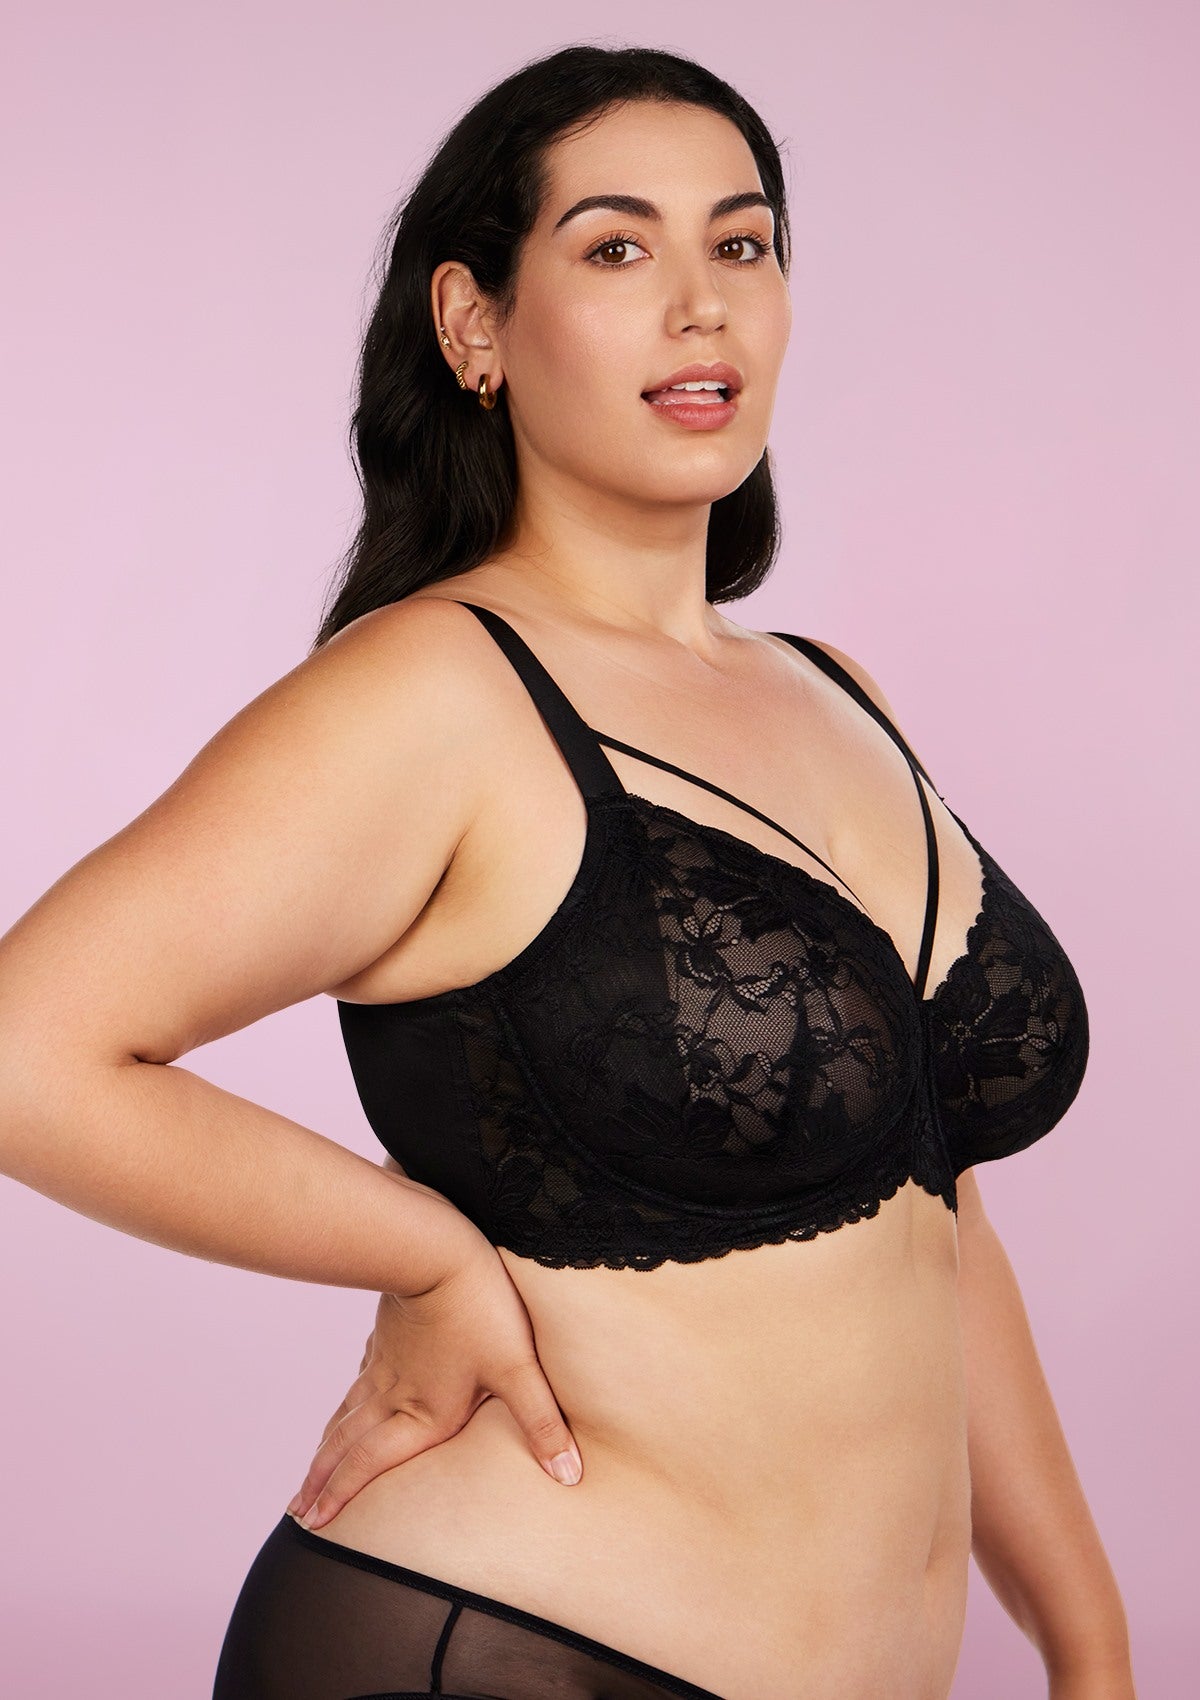 HSIA Pretty In Petals Lace Bra And Panty Set: Non Padded Wired Bra - Black / 32 / C